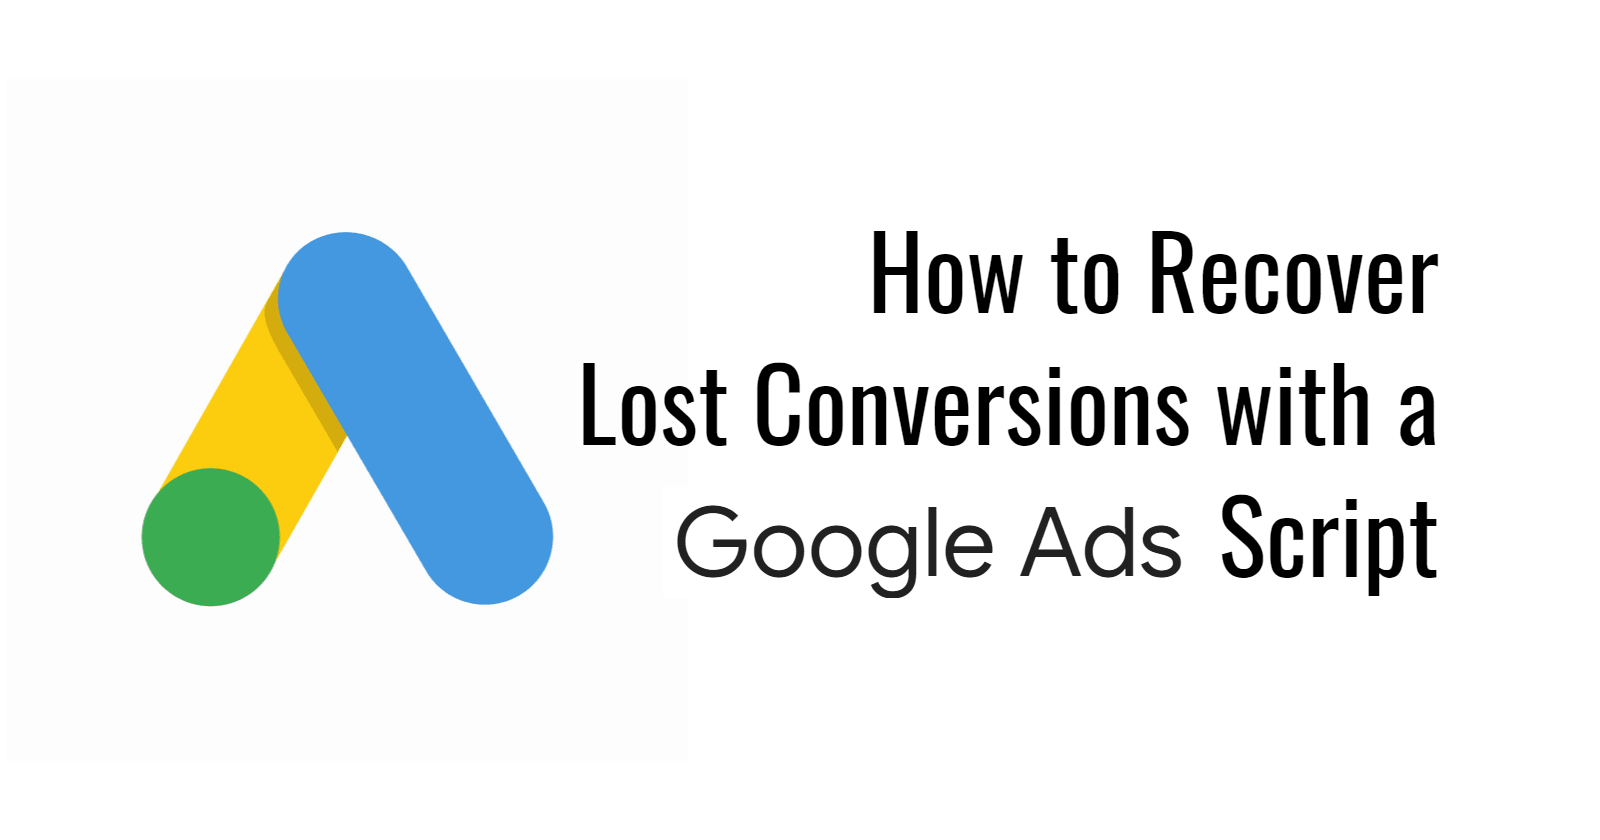 How to Recover Lost Conversions with a Google Ads Script